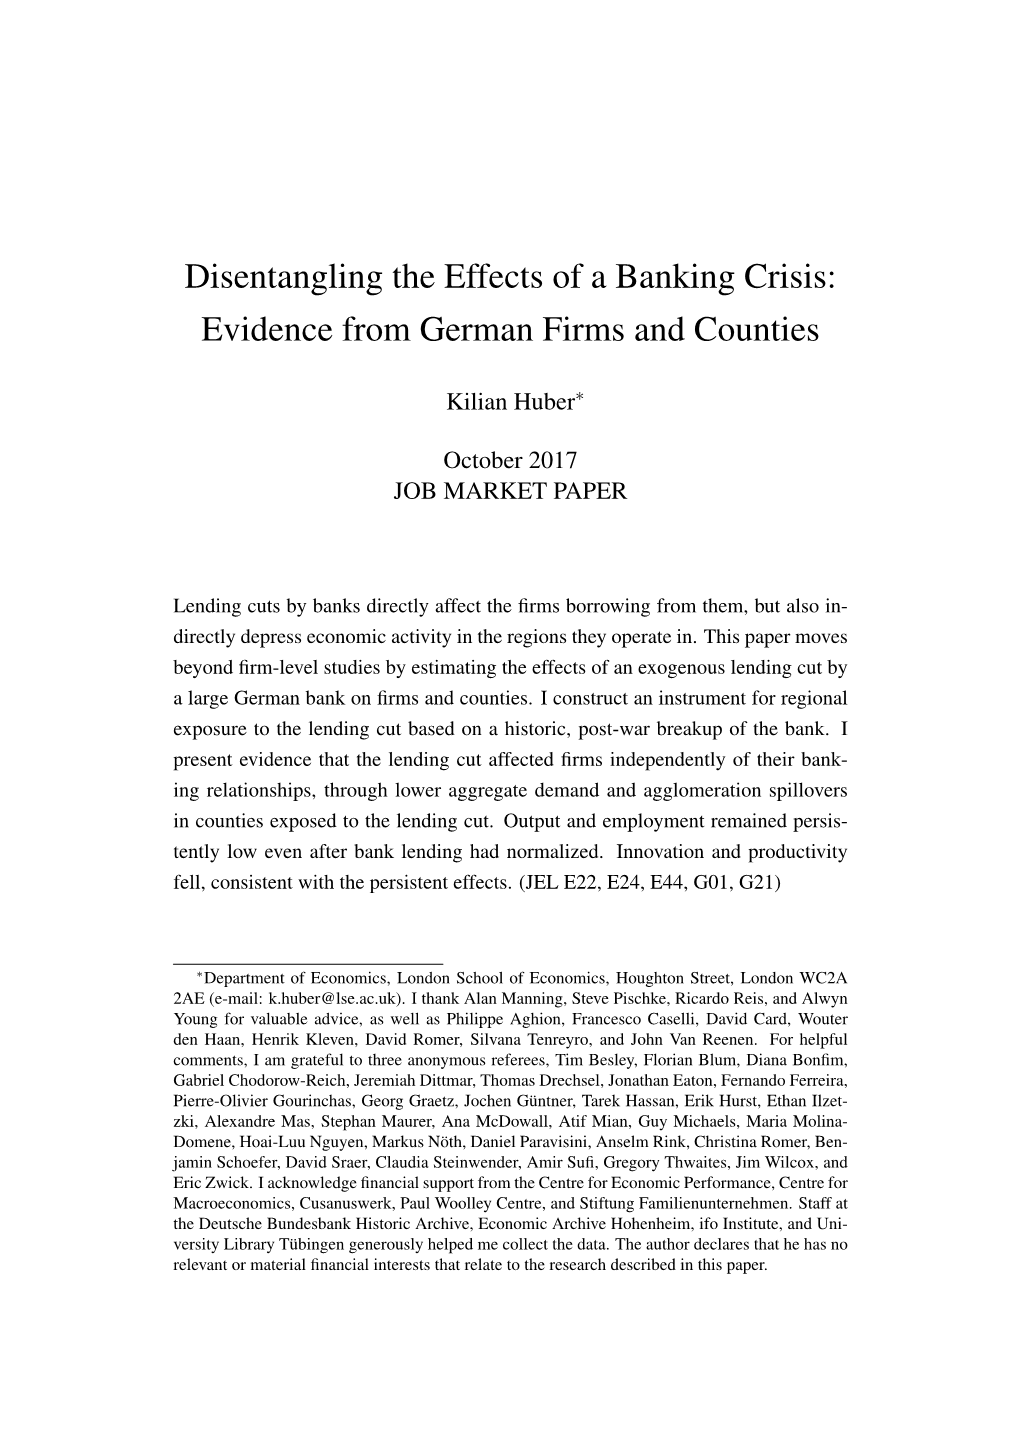 Disentangling the Effects of a Banking Crisis: Evidence from German Firms and Counties